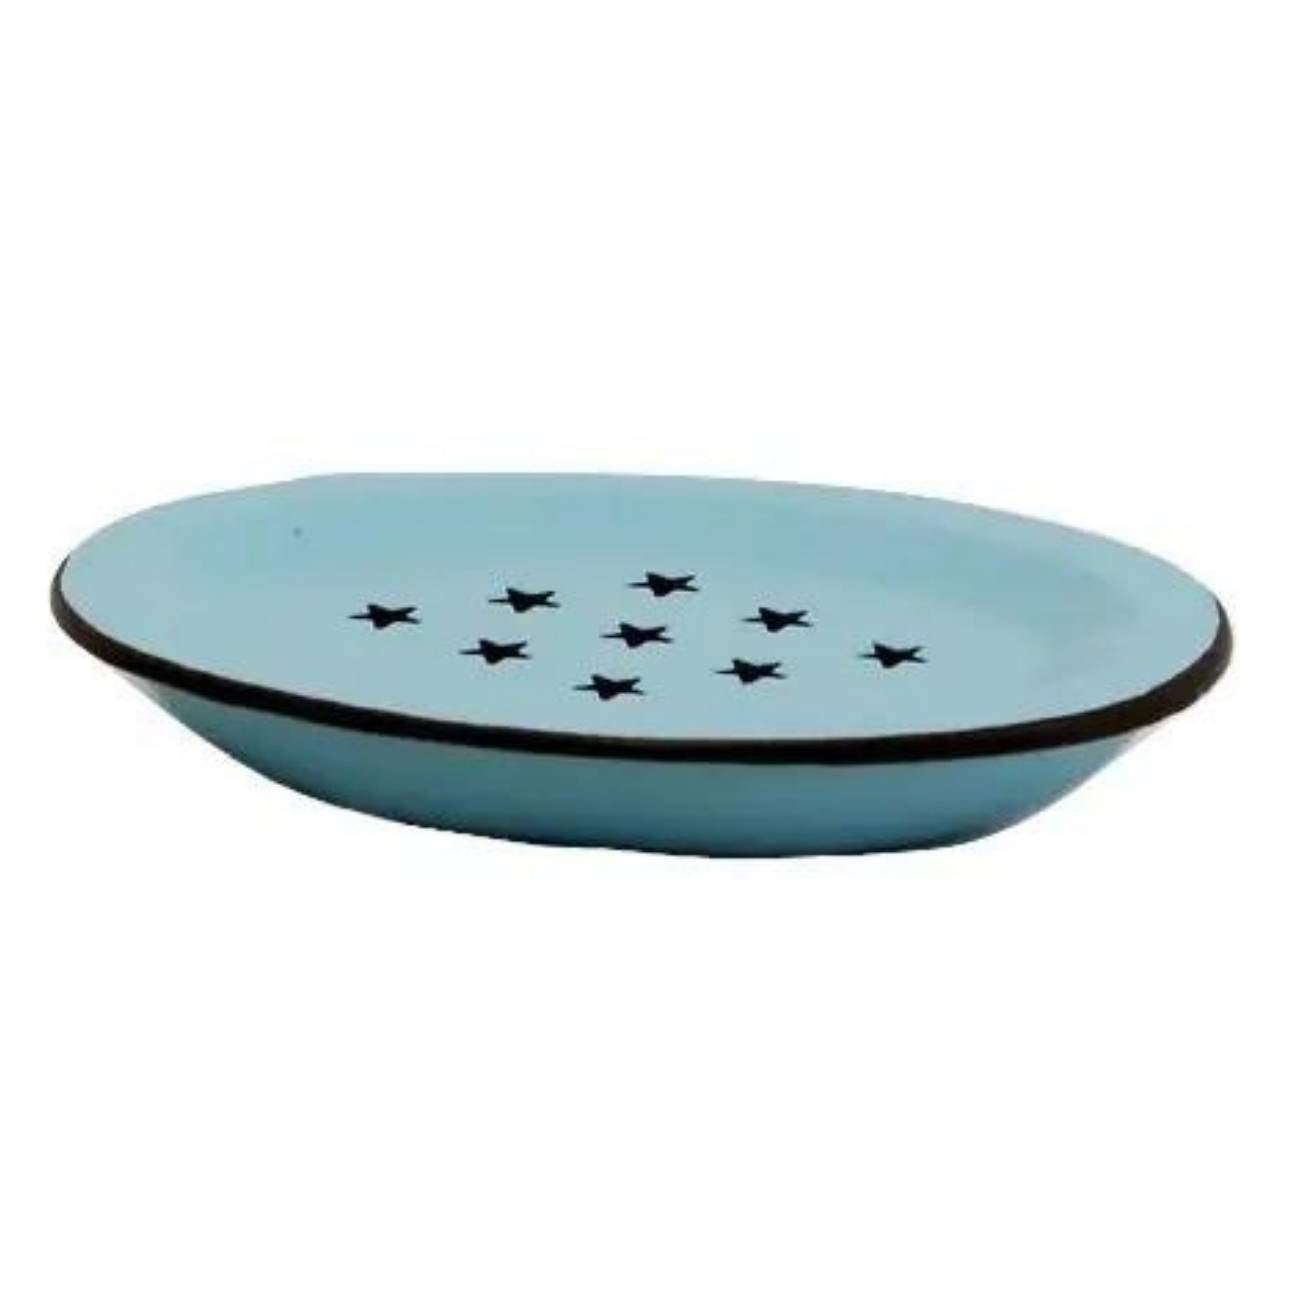 Draining Soap Dish With Tray | Fern Valley Soap | Enameled Metal